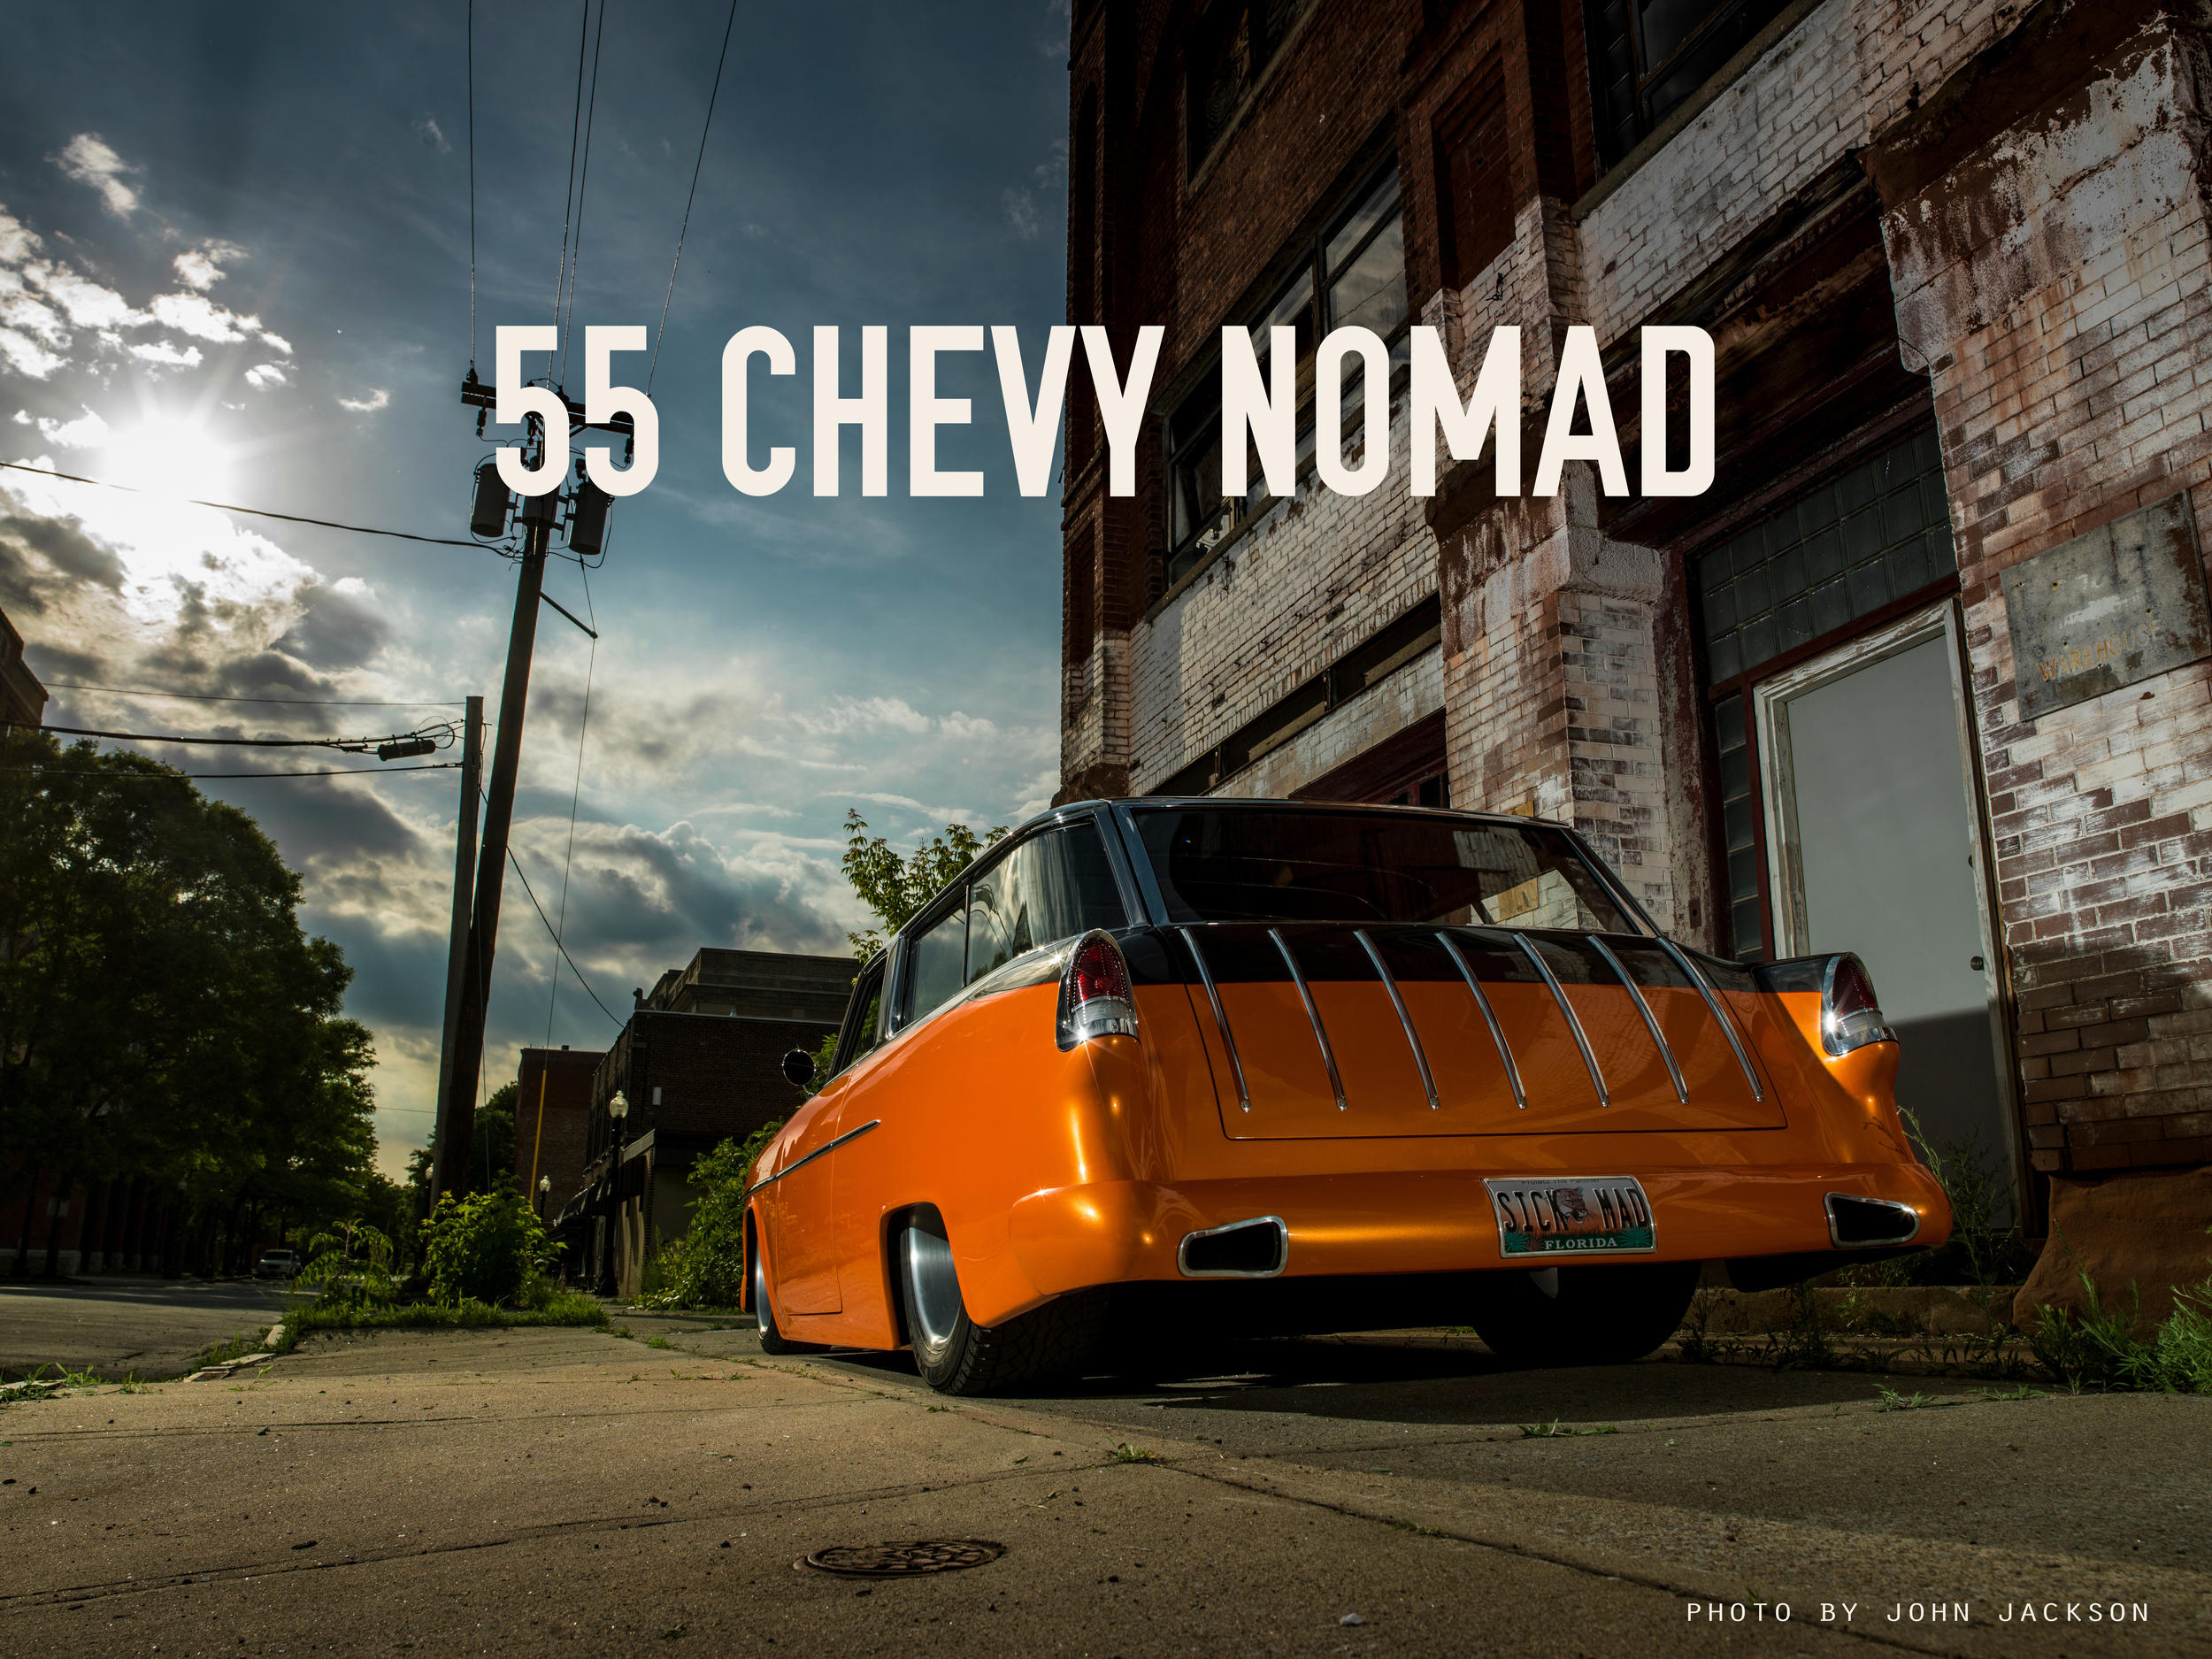 Nomad Cover Photo.jpg